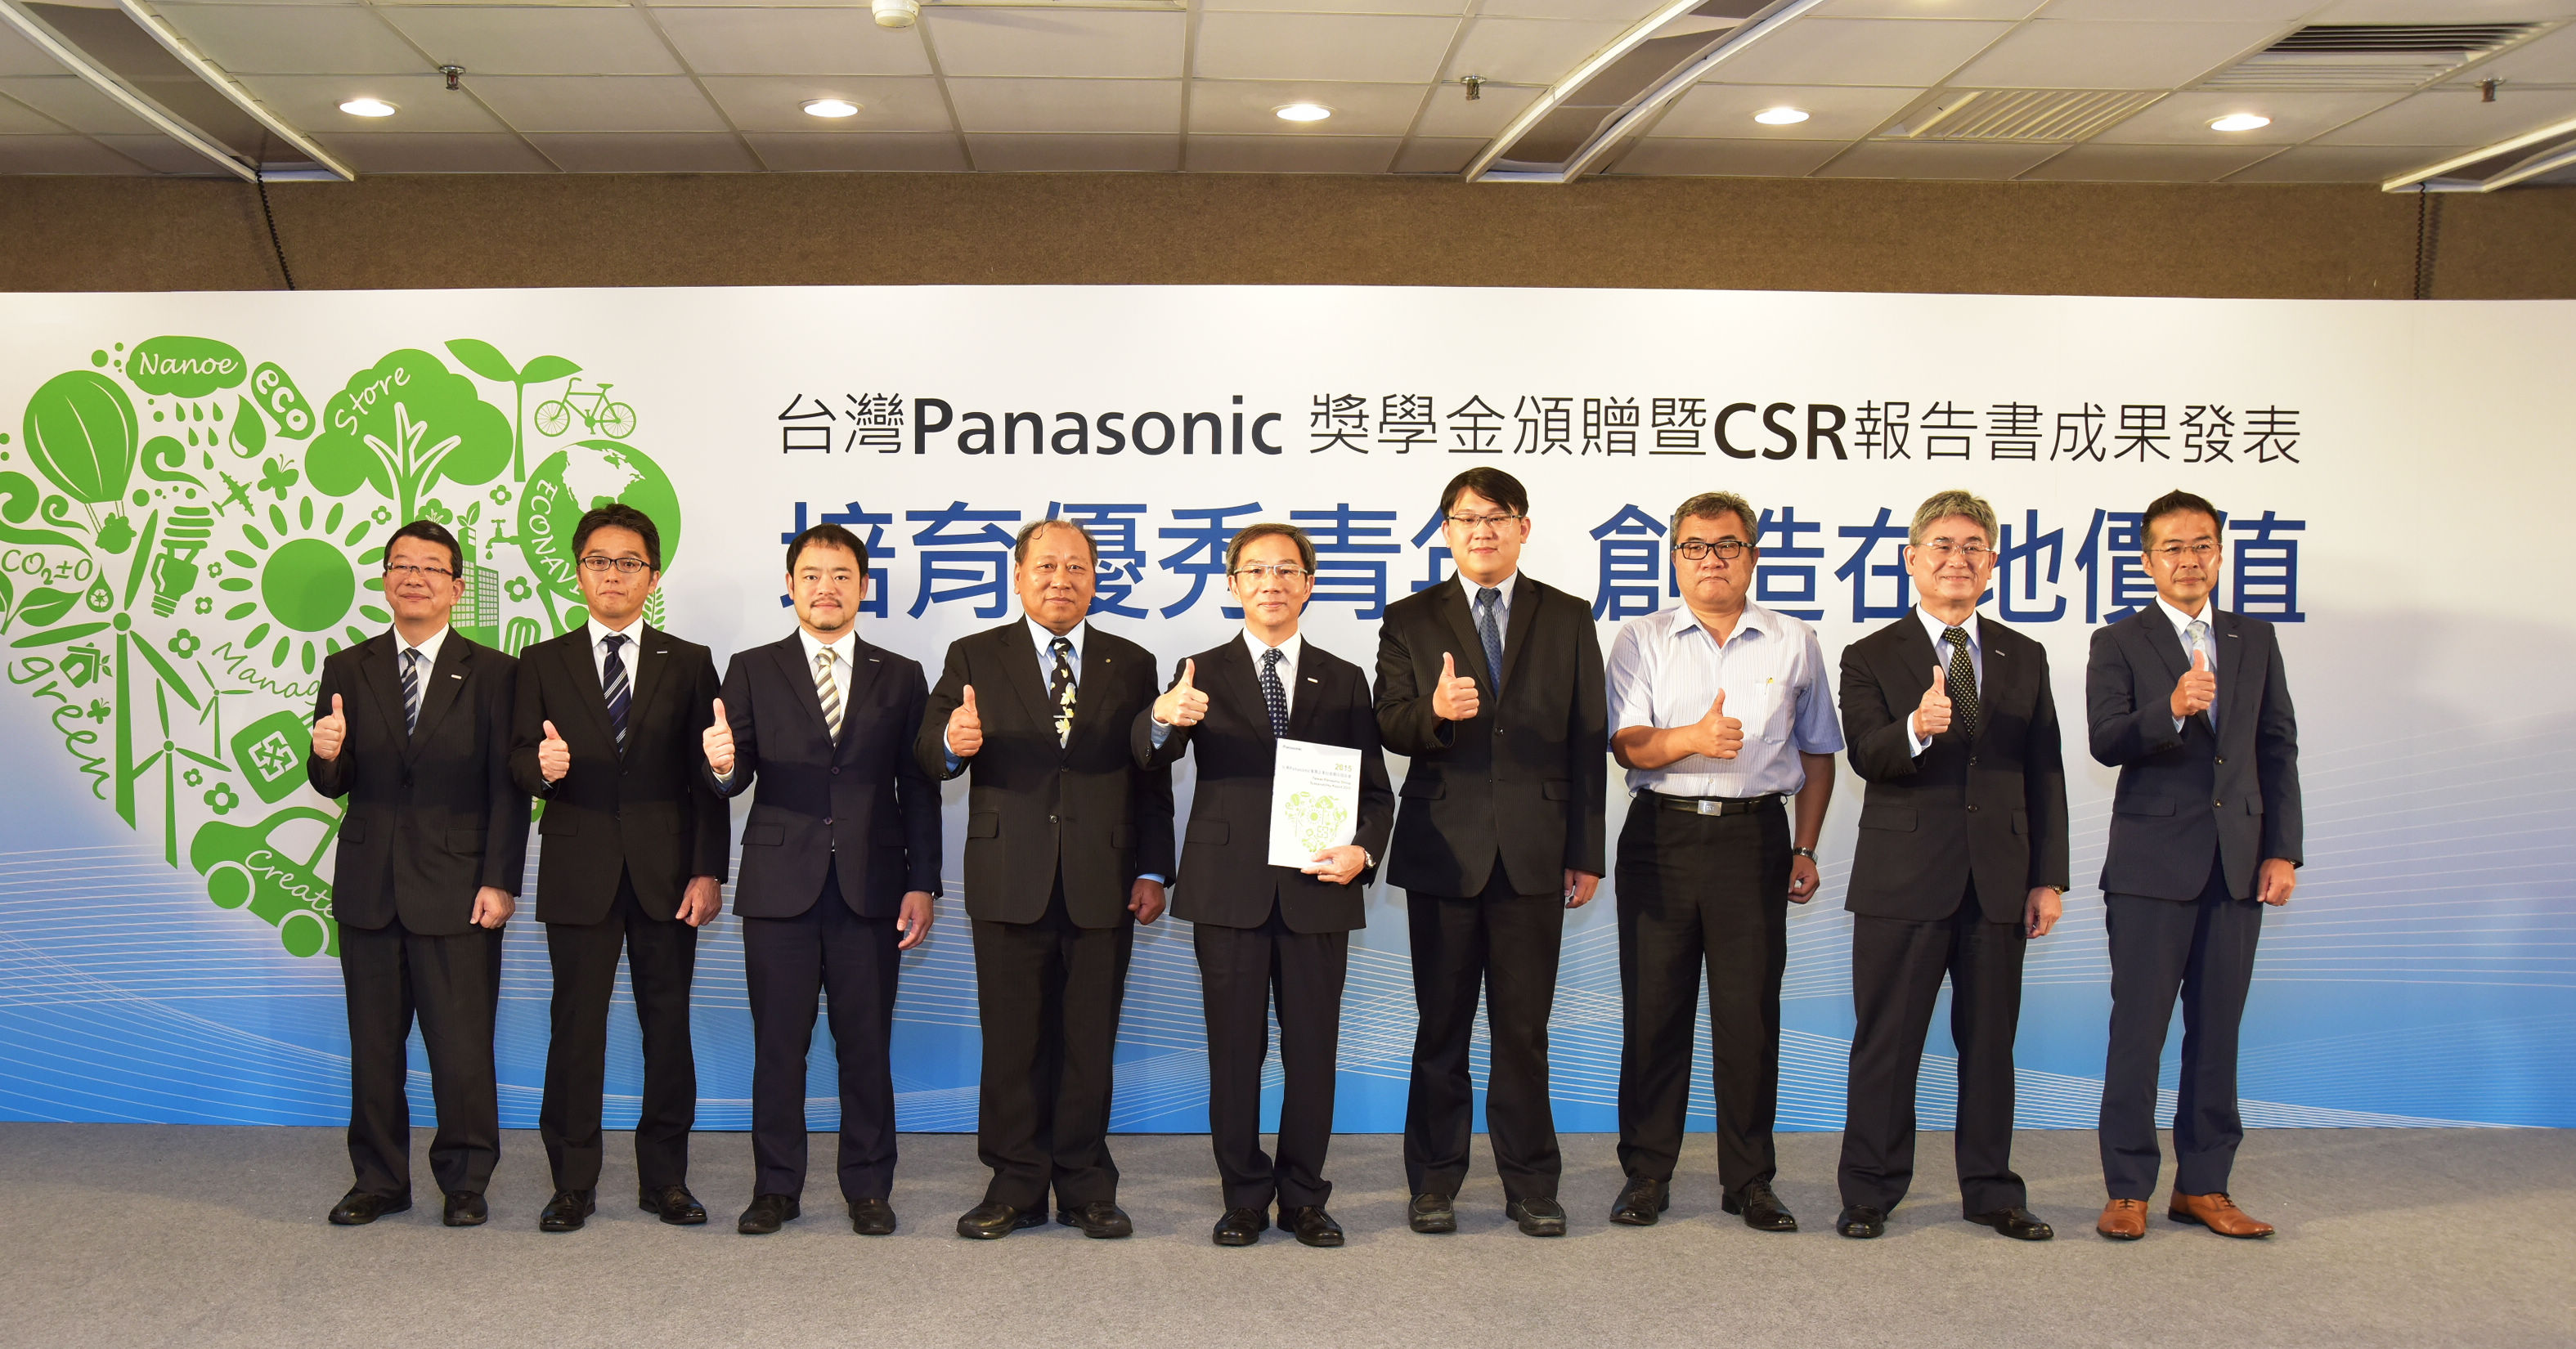 Photo of Release the first CSR, the first in the Japanese manufacturer of home appliance